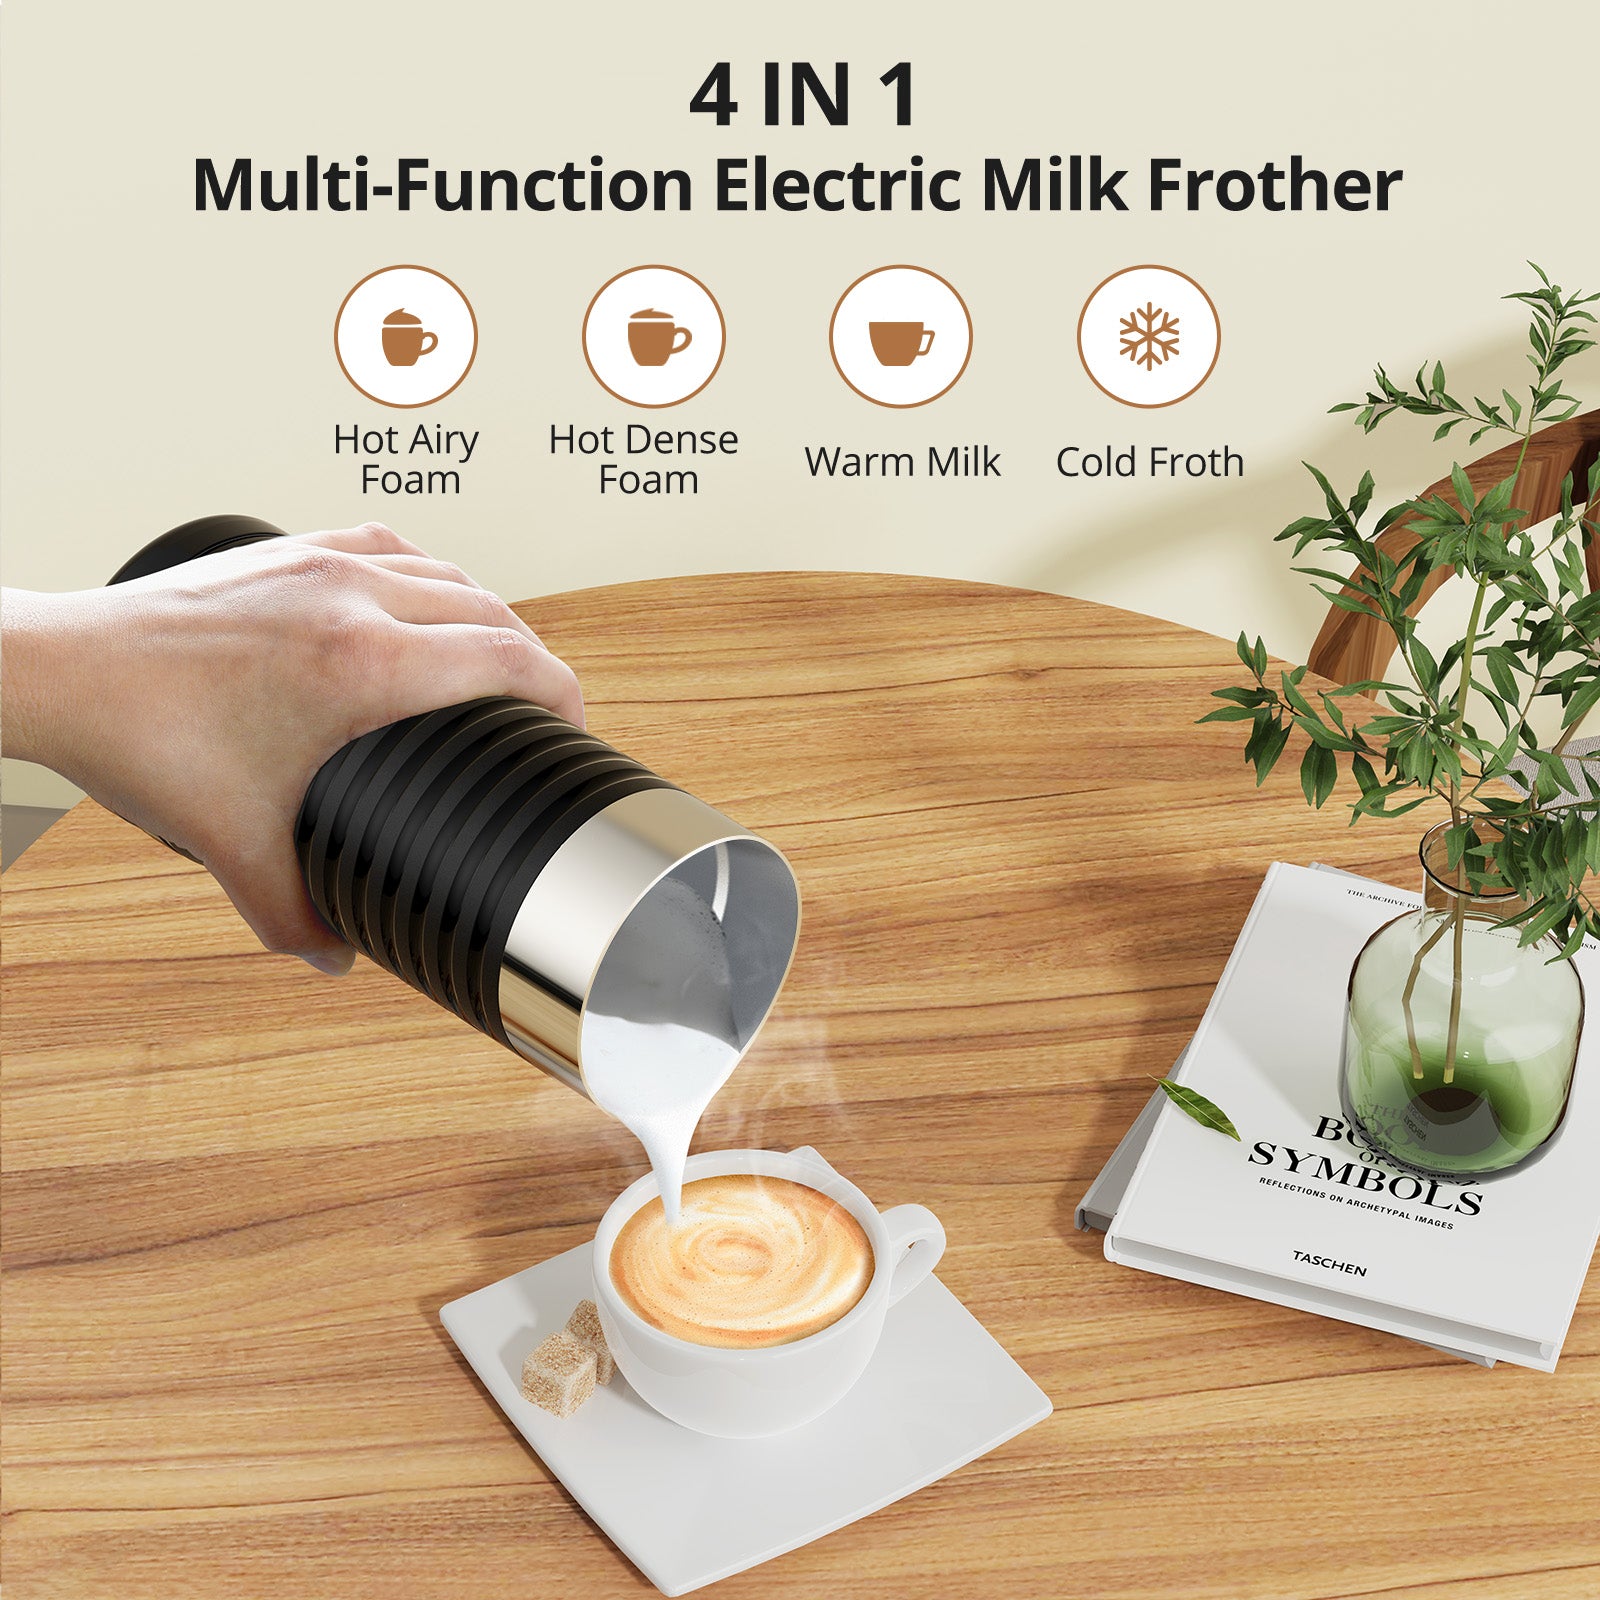 Paris Rh?ne 4-in-1 Electric Coffee Frother MF002, Automatic Hot and Cold Foam Maker